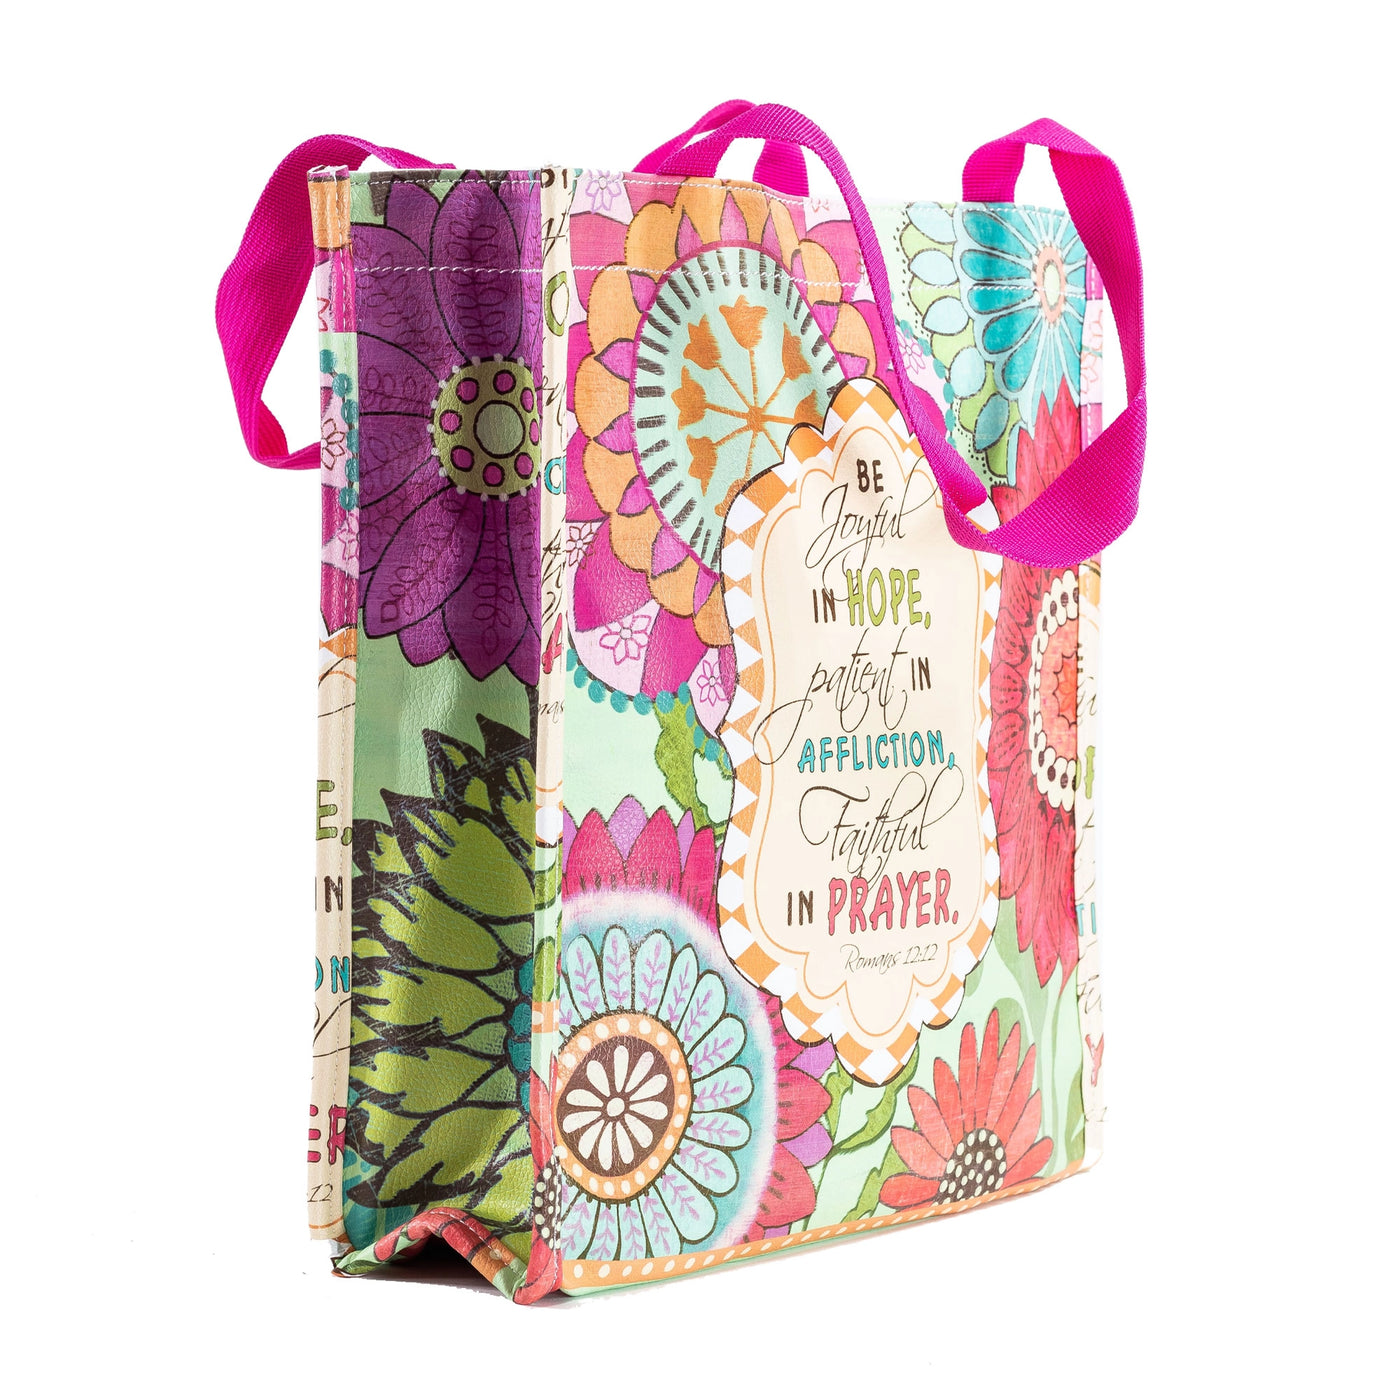 Colorful tote bag with pink straps and Romans 12:12 printed on the front